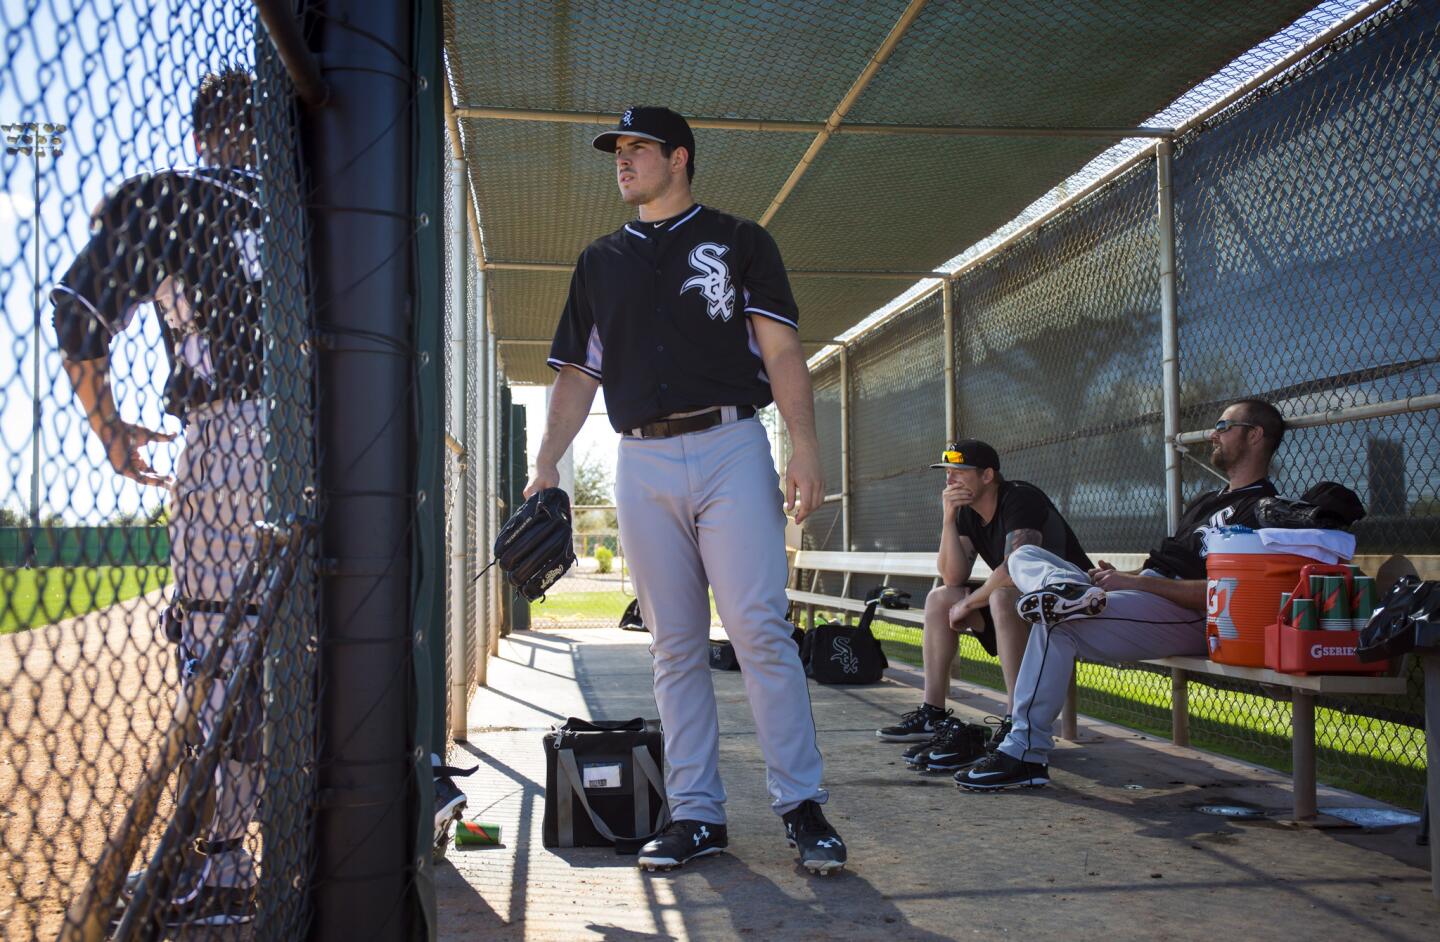 White Sox practice at spring training - Los Angeles Times